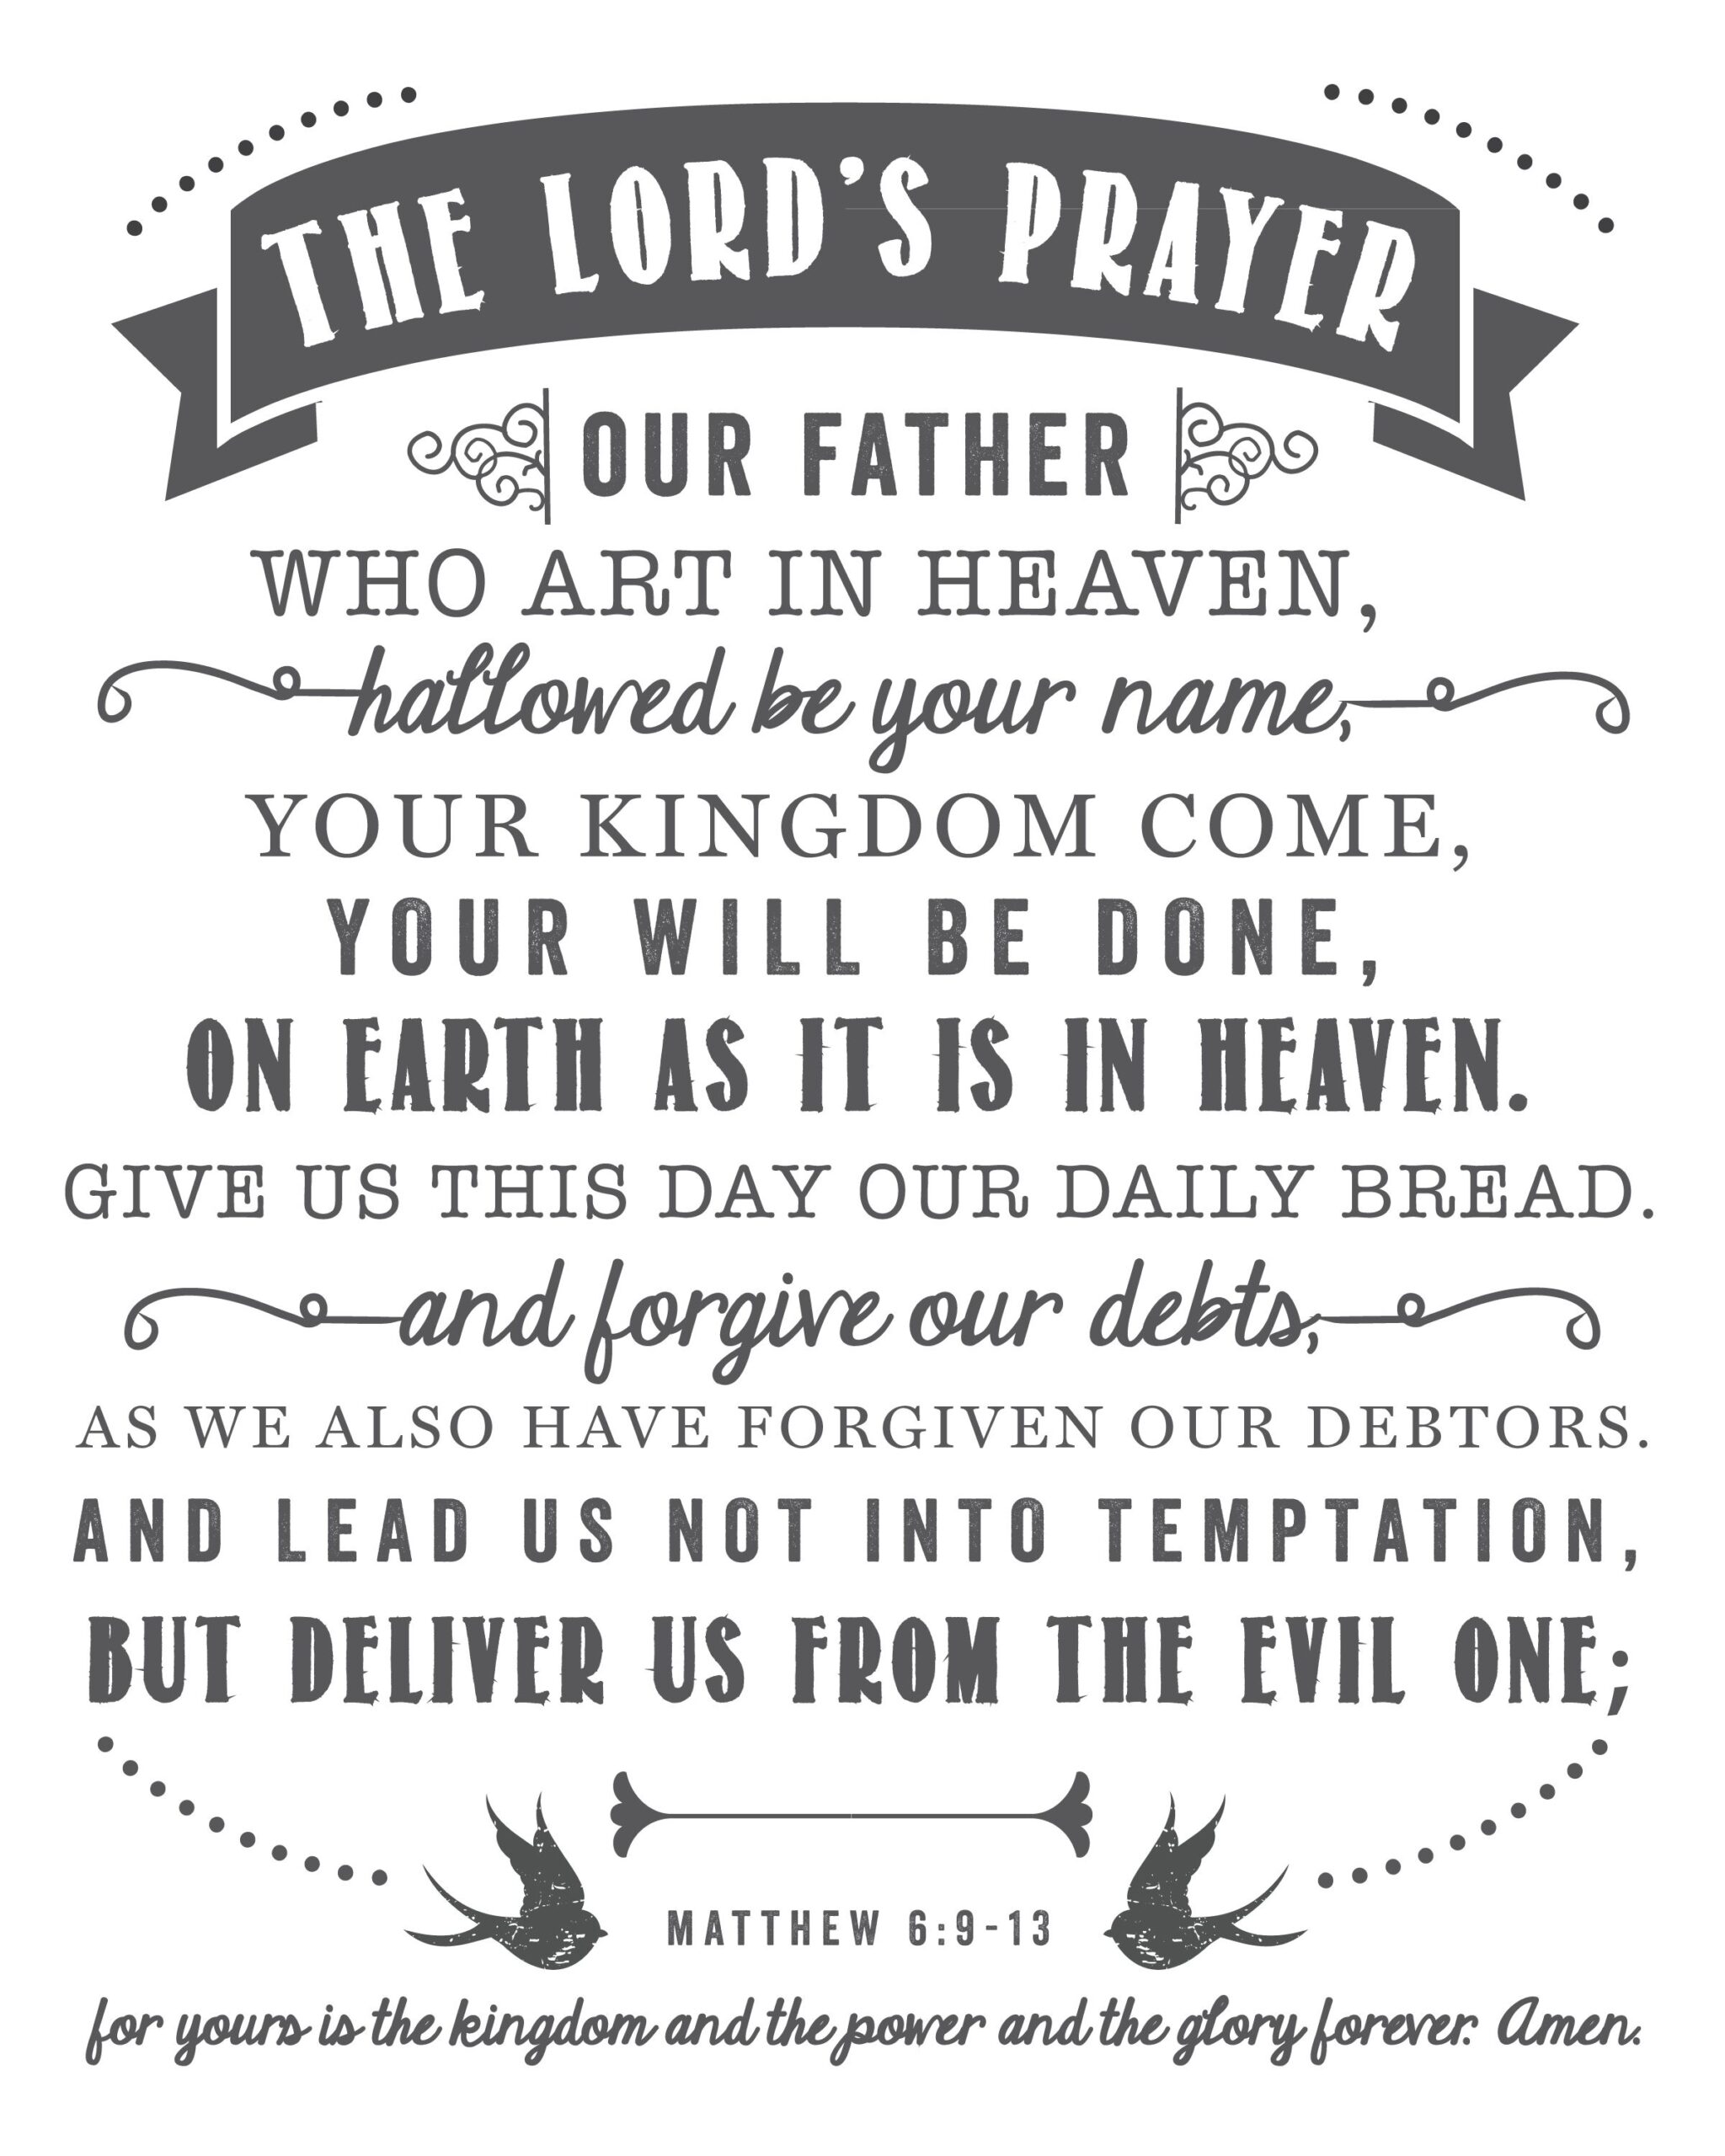 Meditations on the Lord’s Prayer